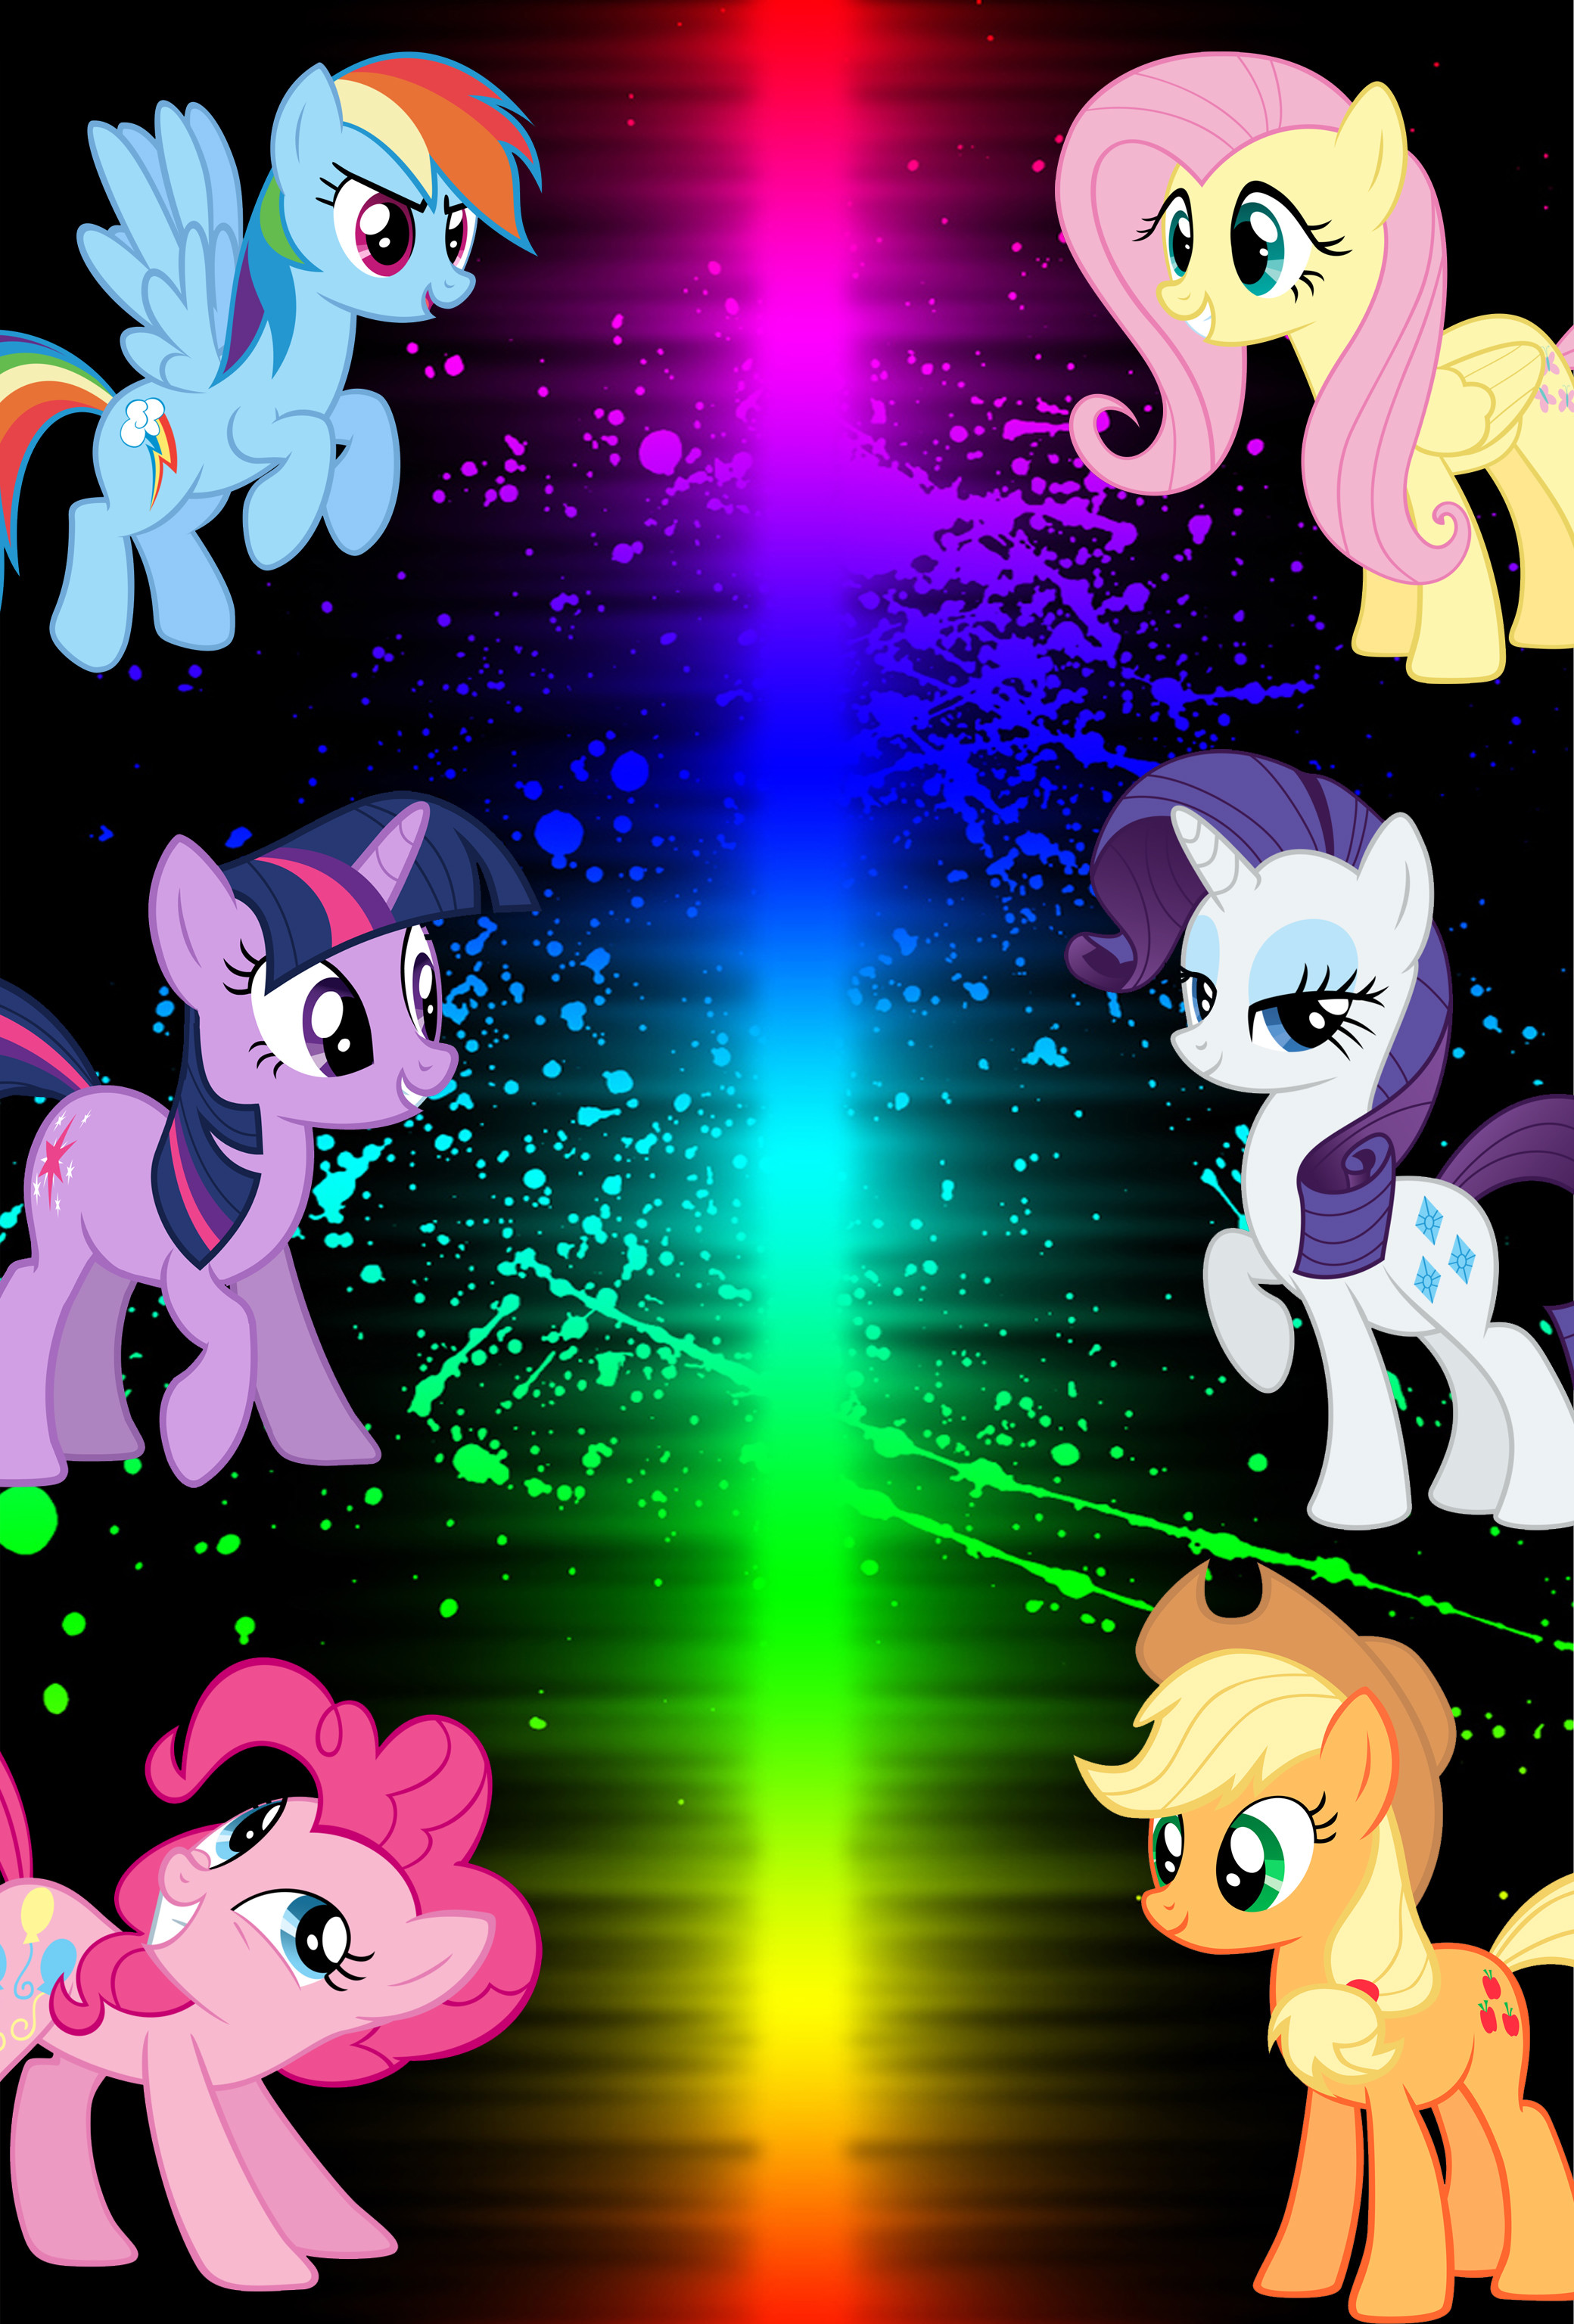 Search Results for “mlp wallpapers iphone – Adorable Wallpapers